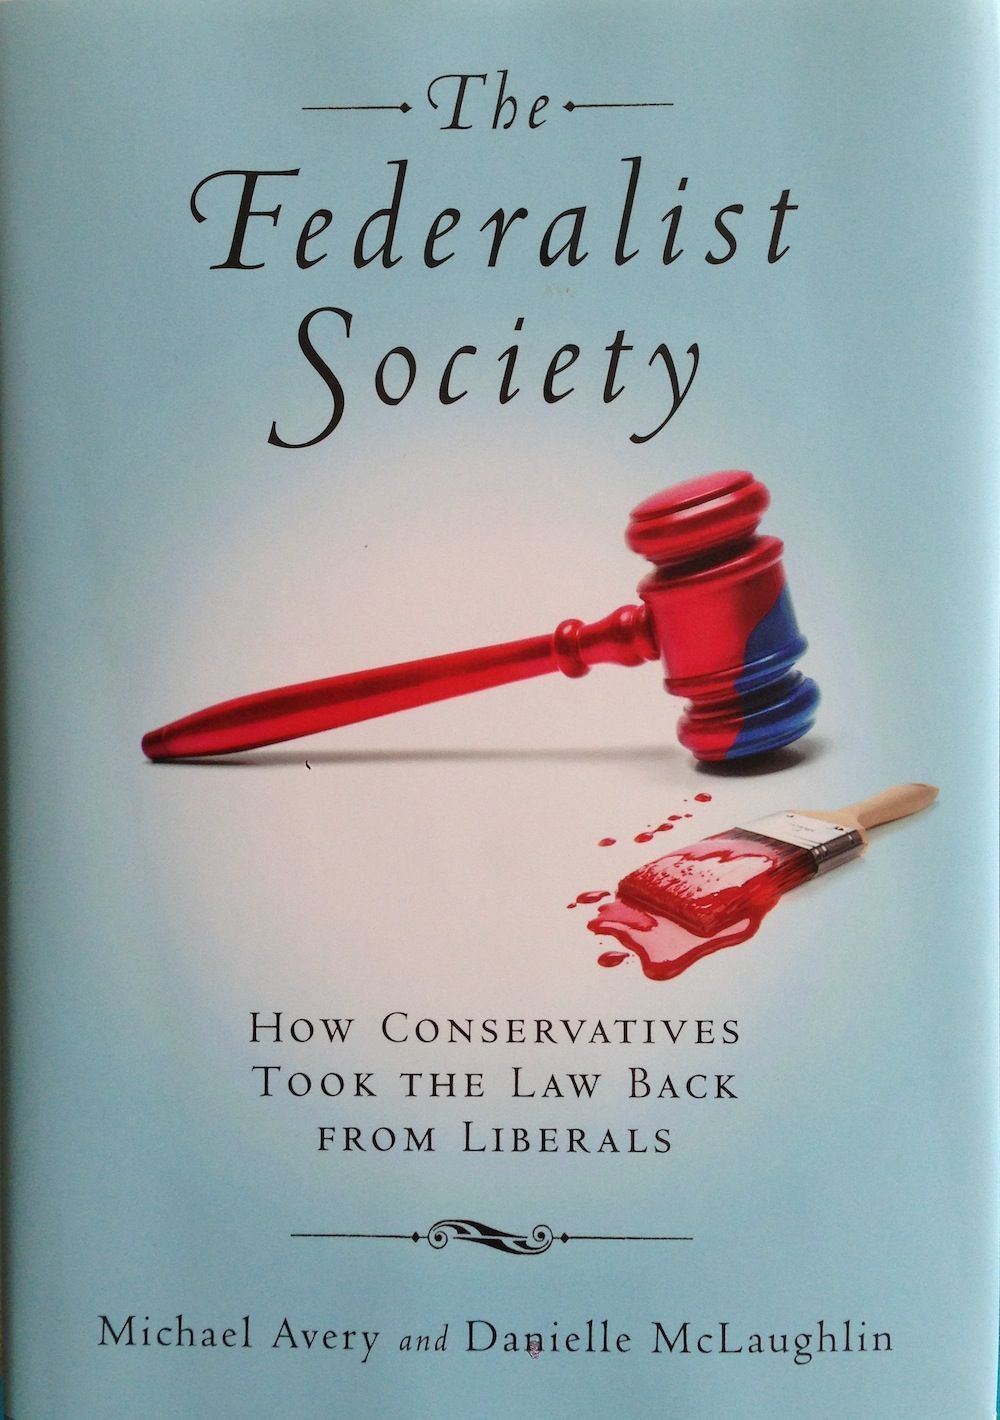 Taking Over the Judiciary: The Impact of the Federalist Society